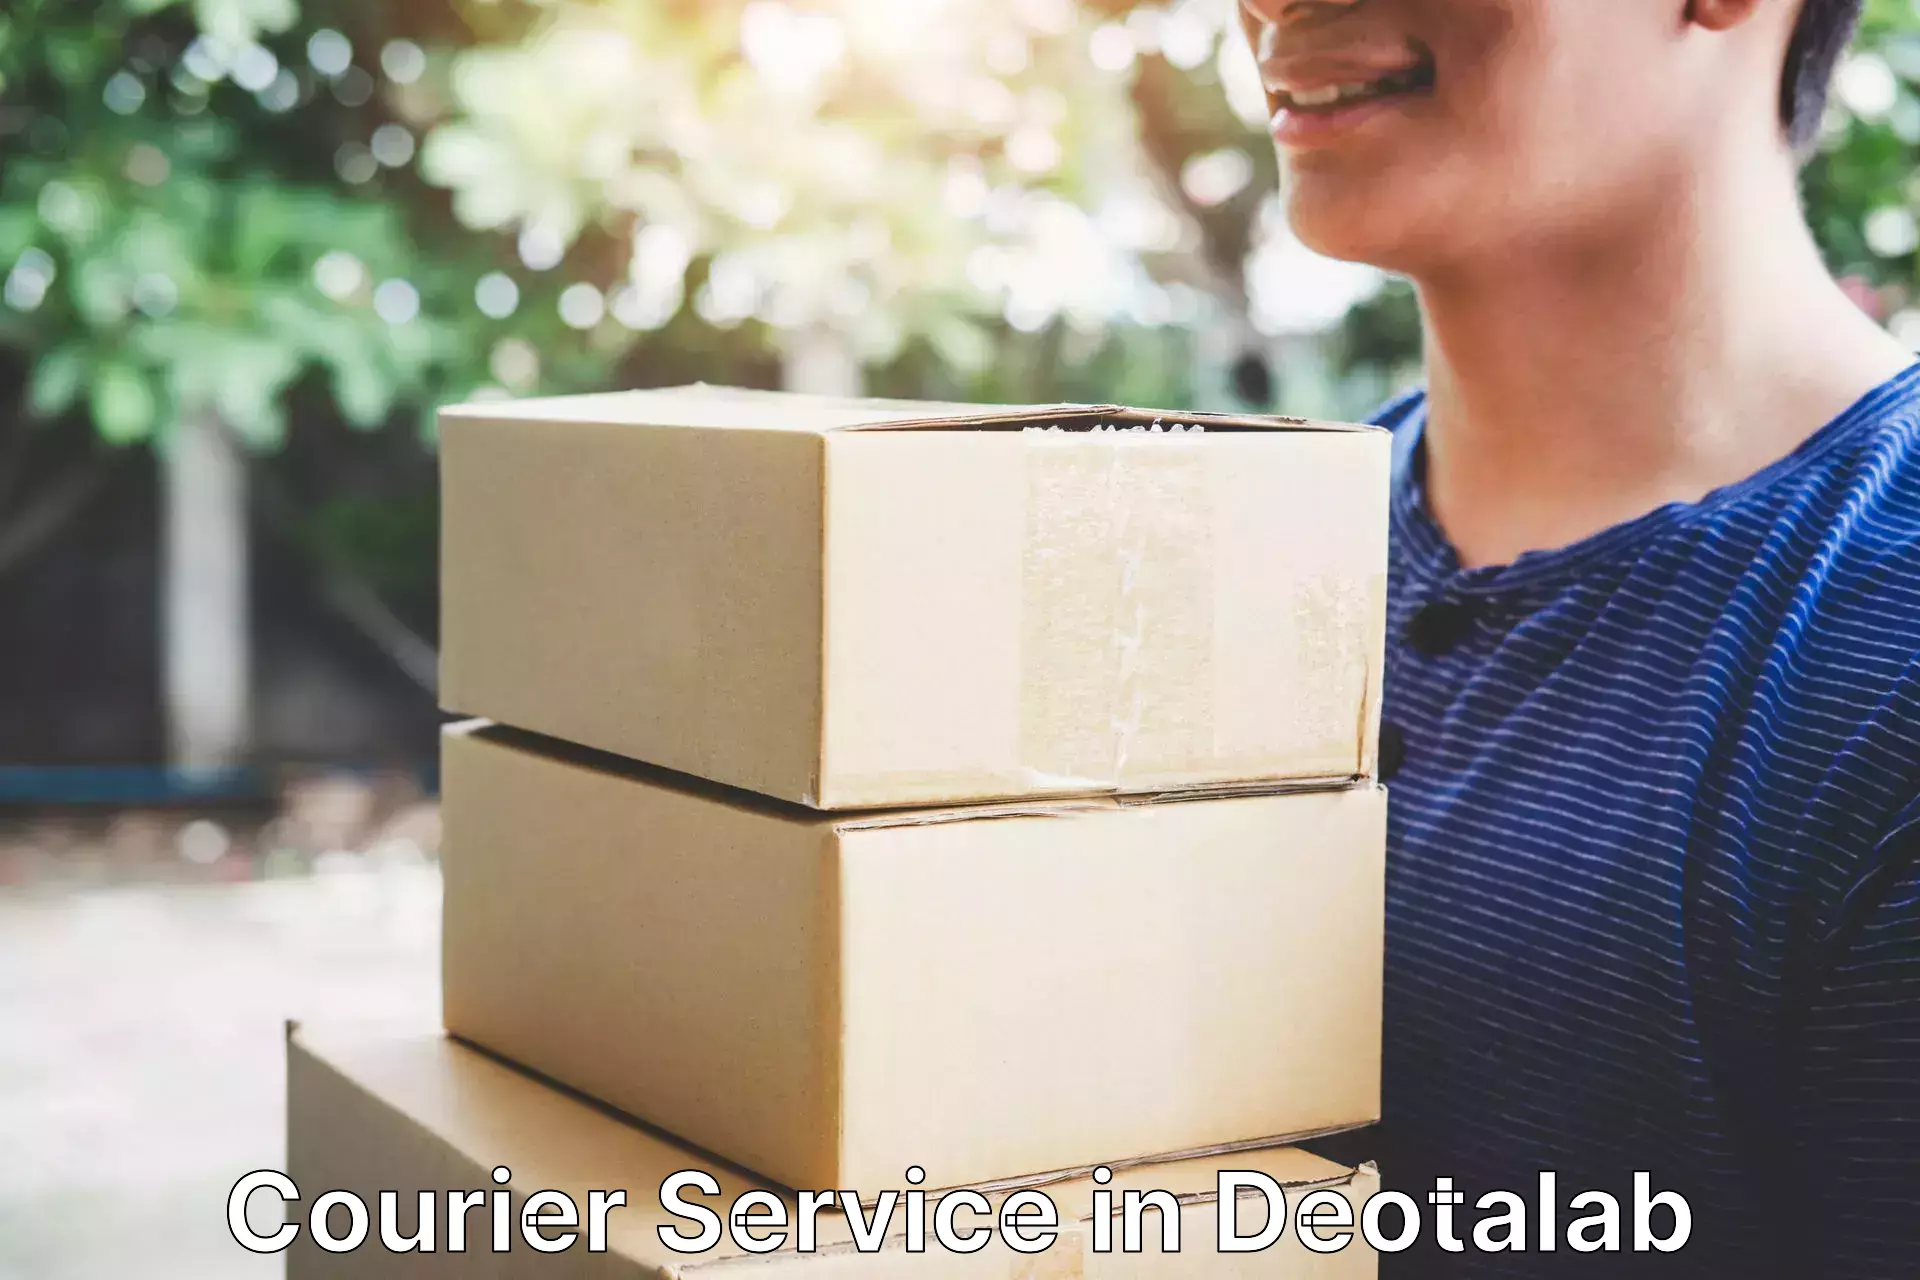 Logistics and distribution in Deotalab